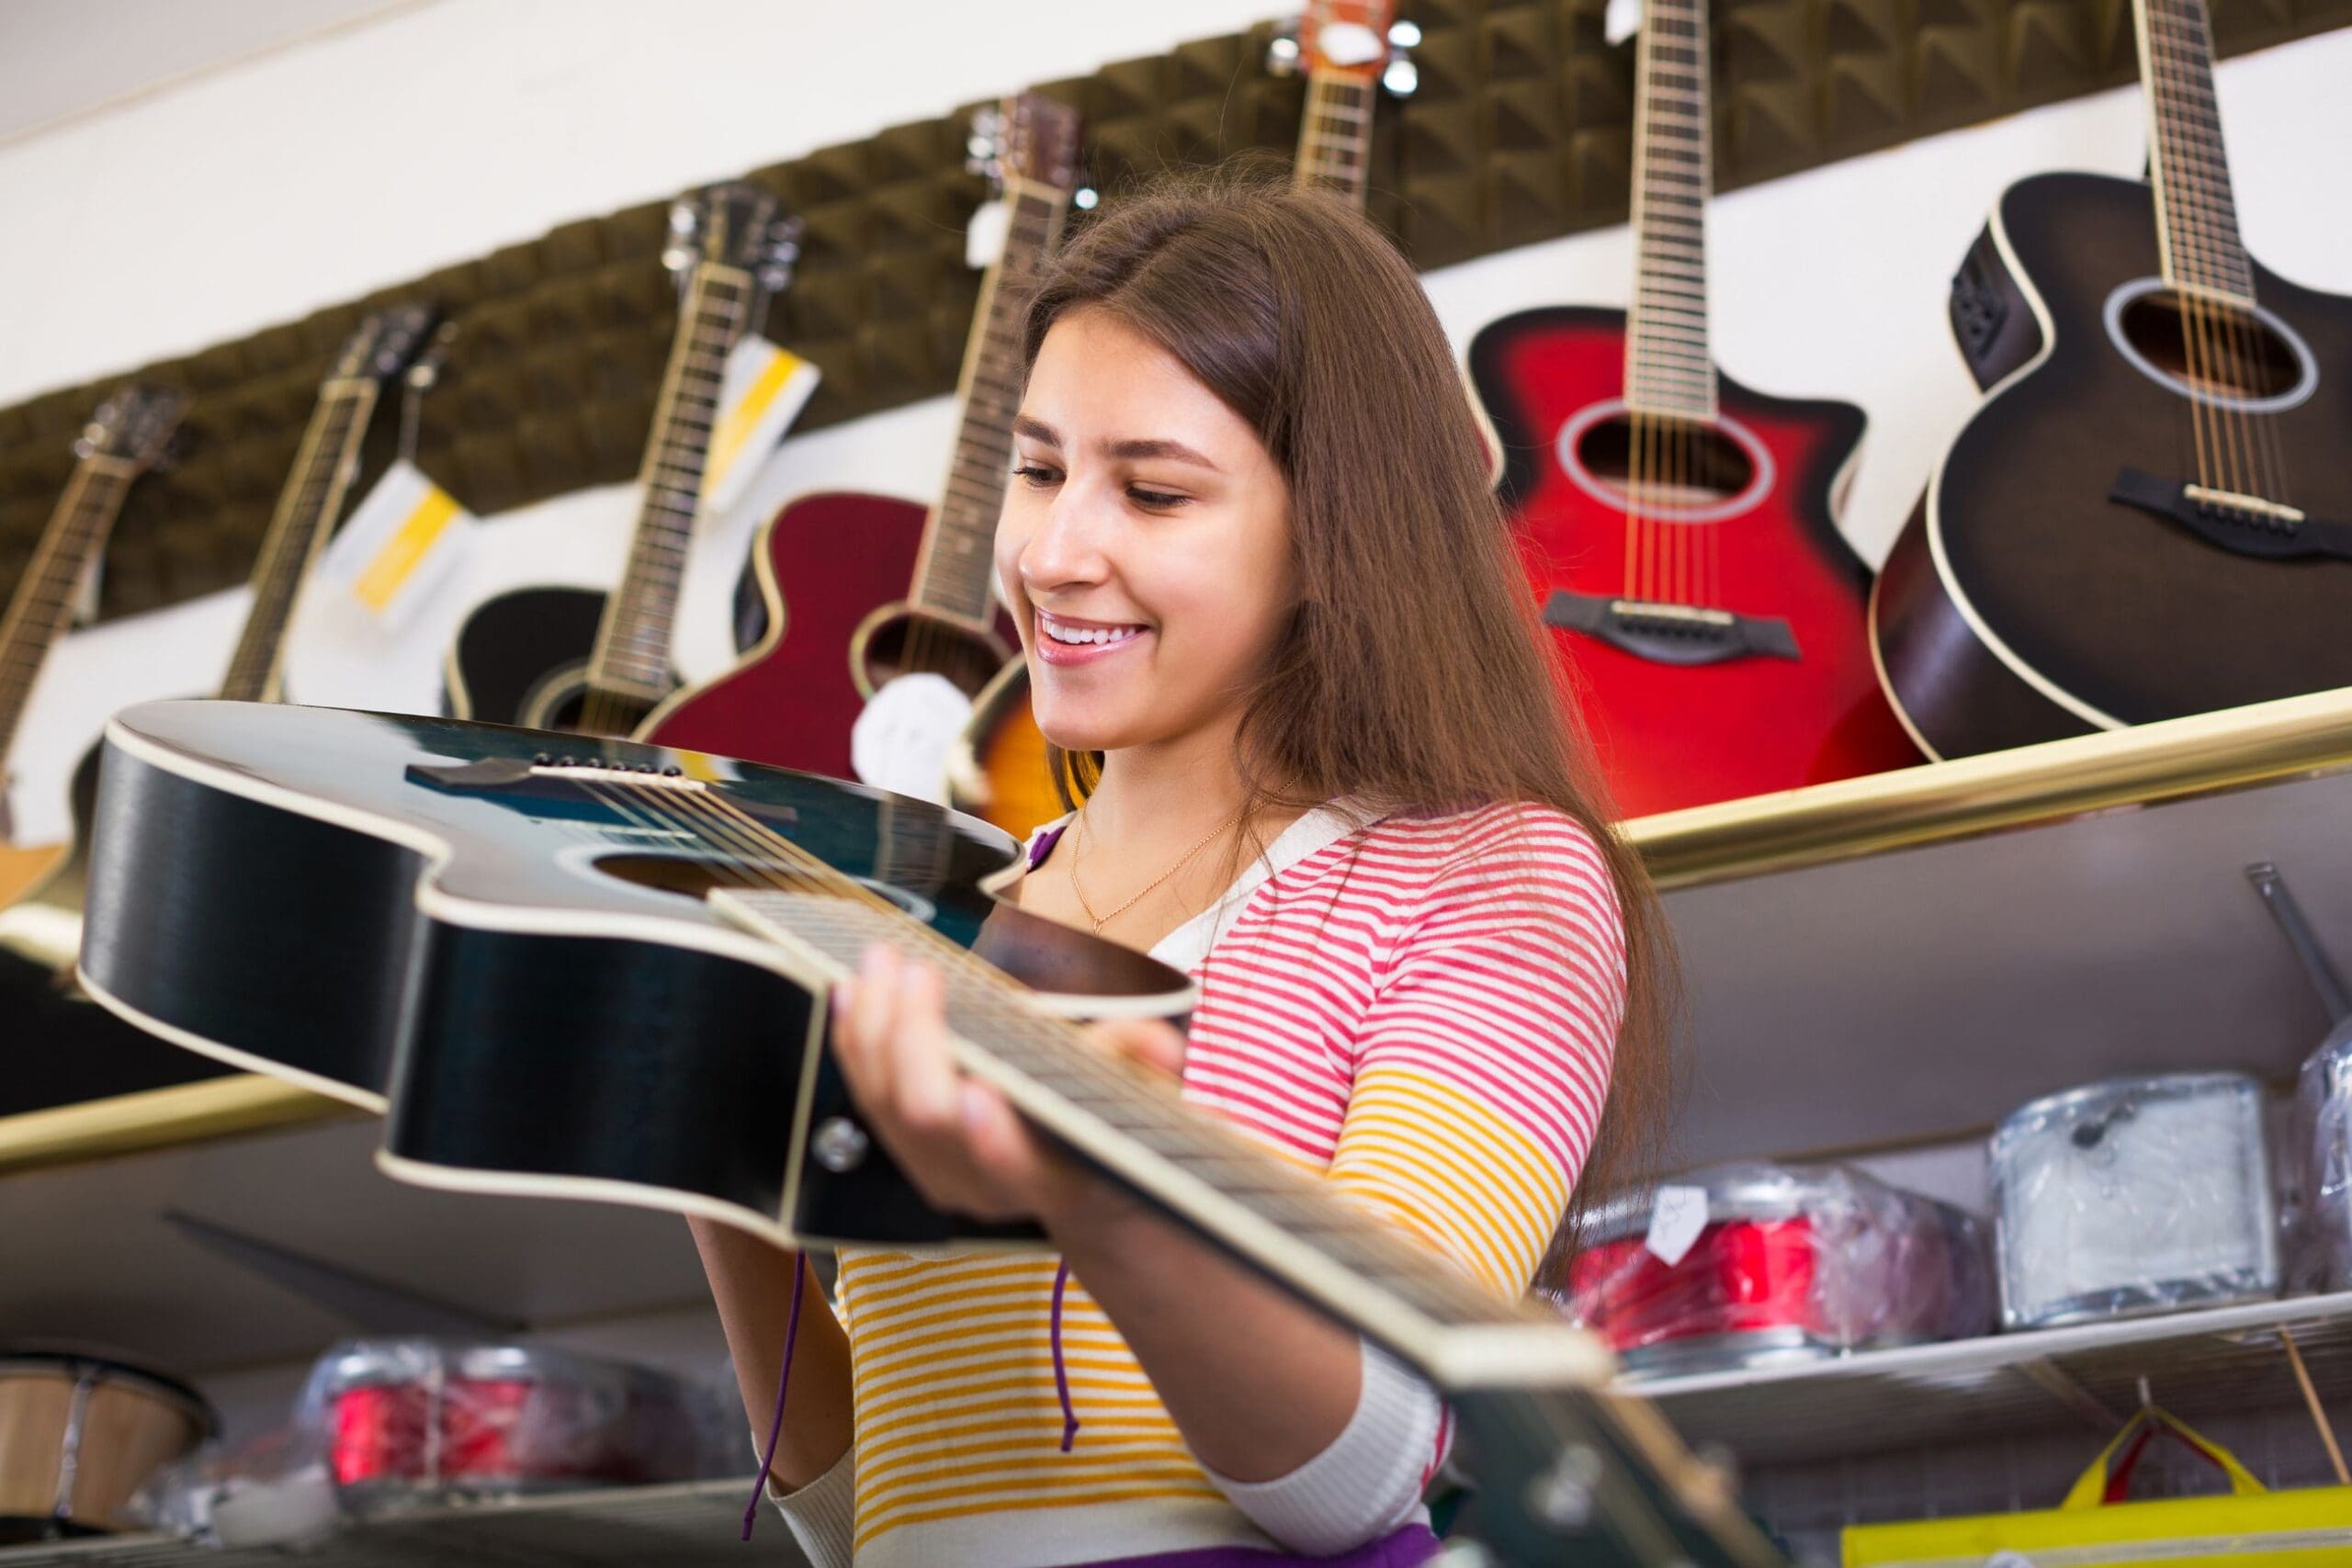 Young female purchasing her first guitar